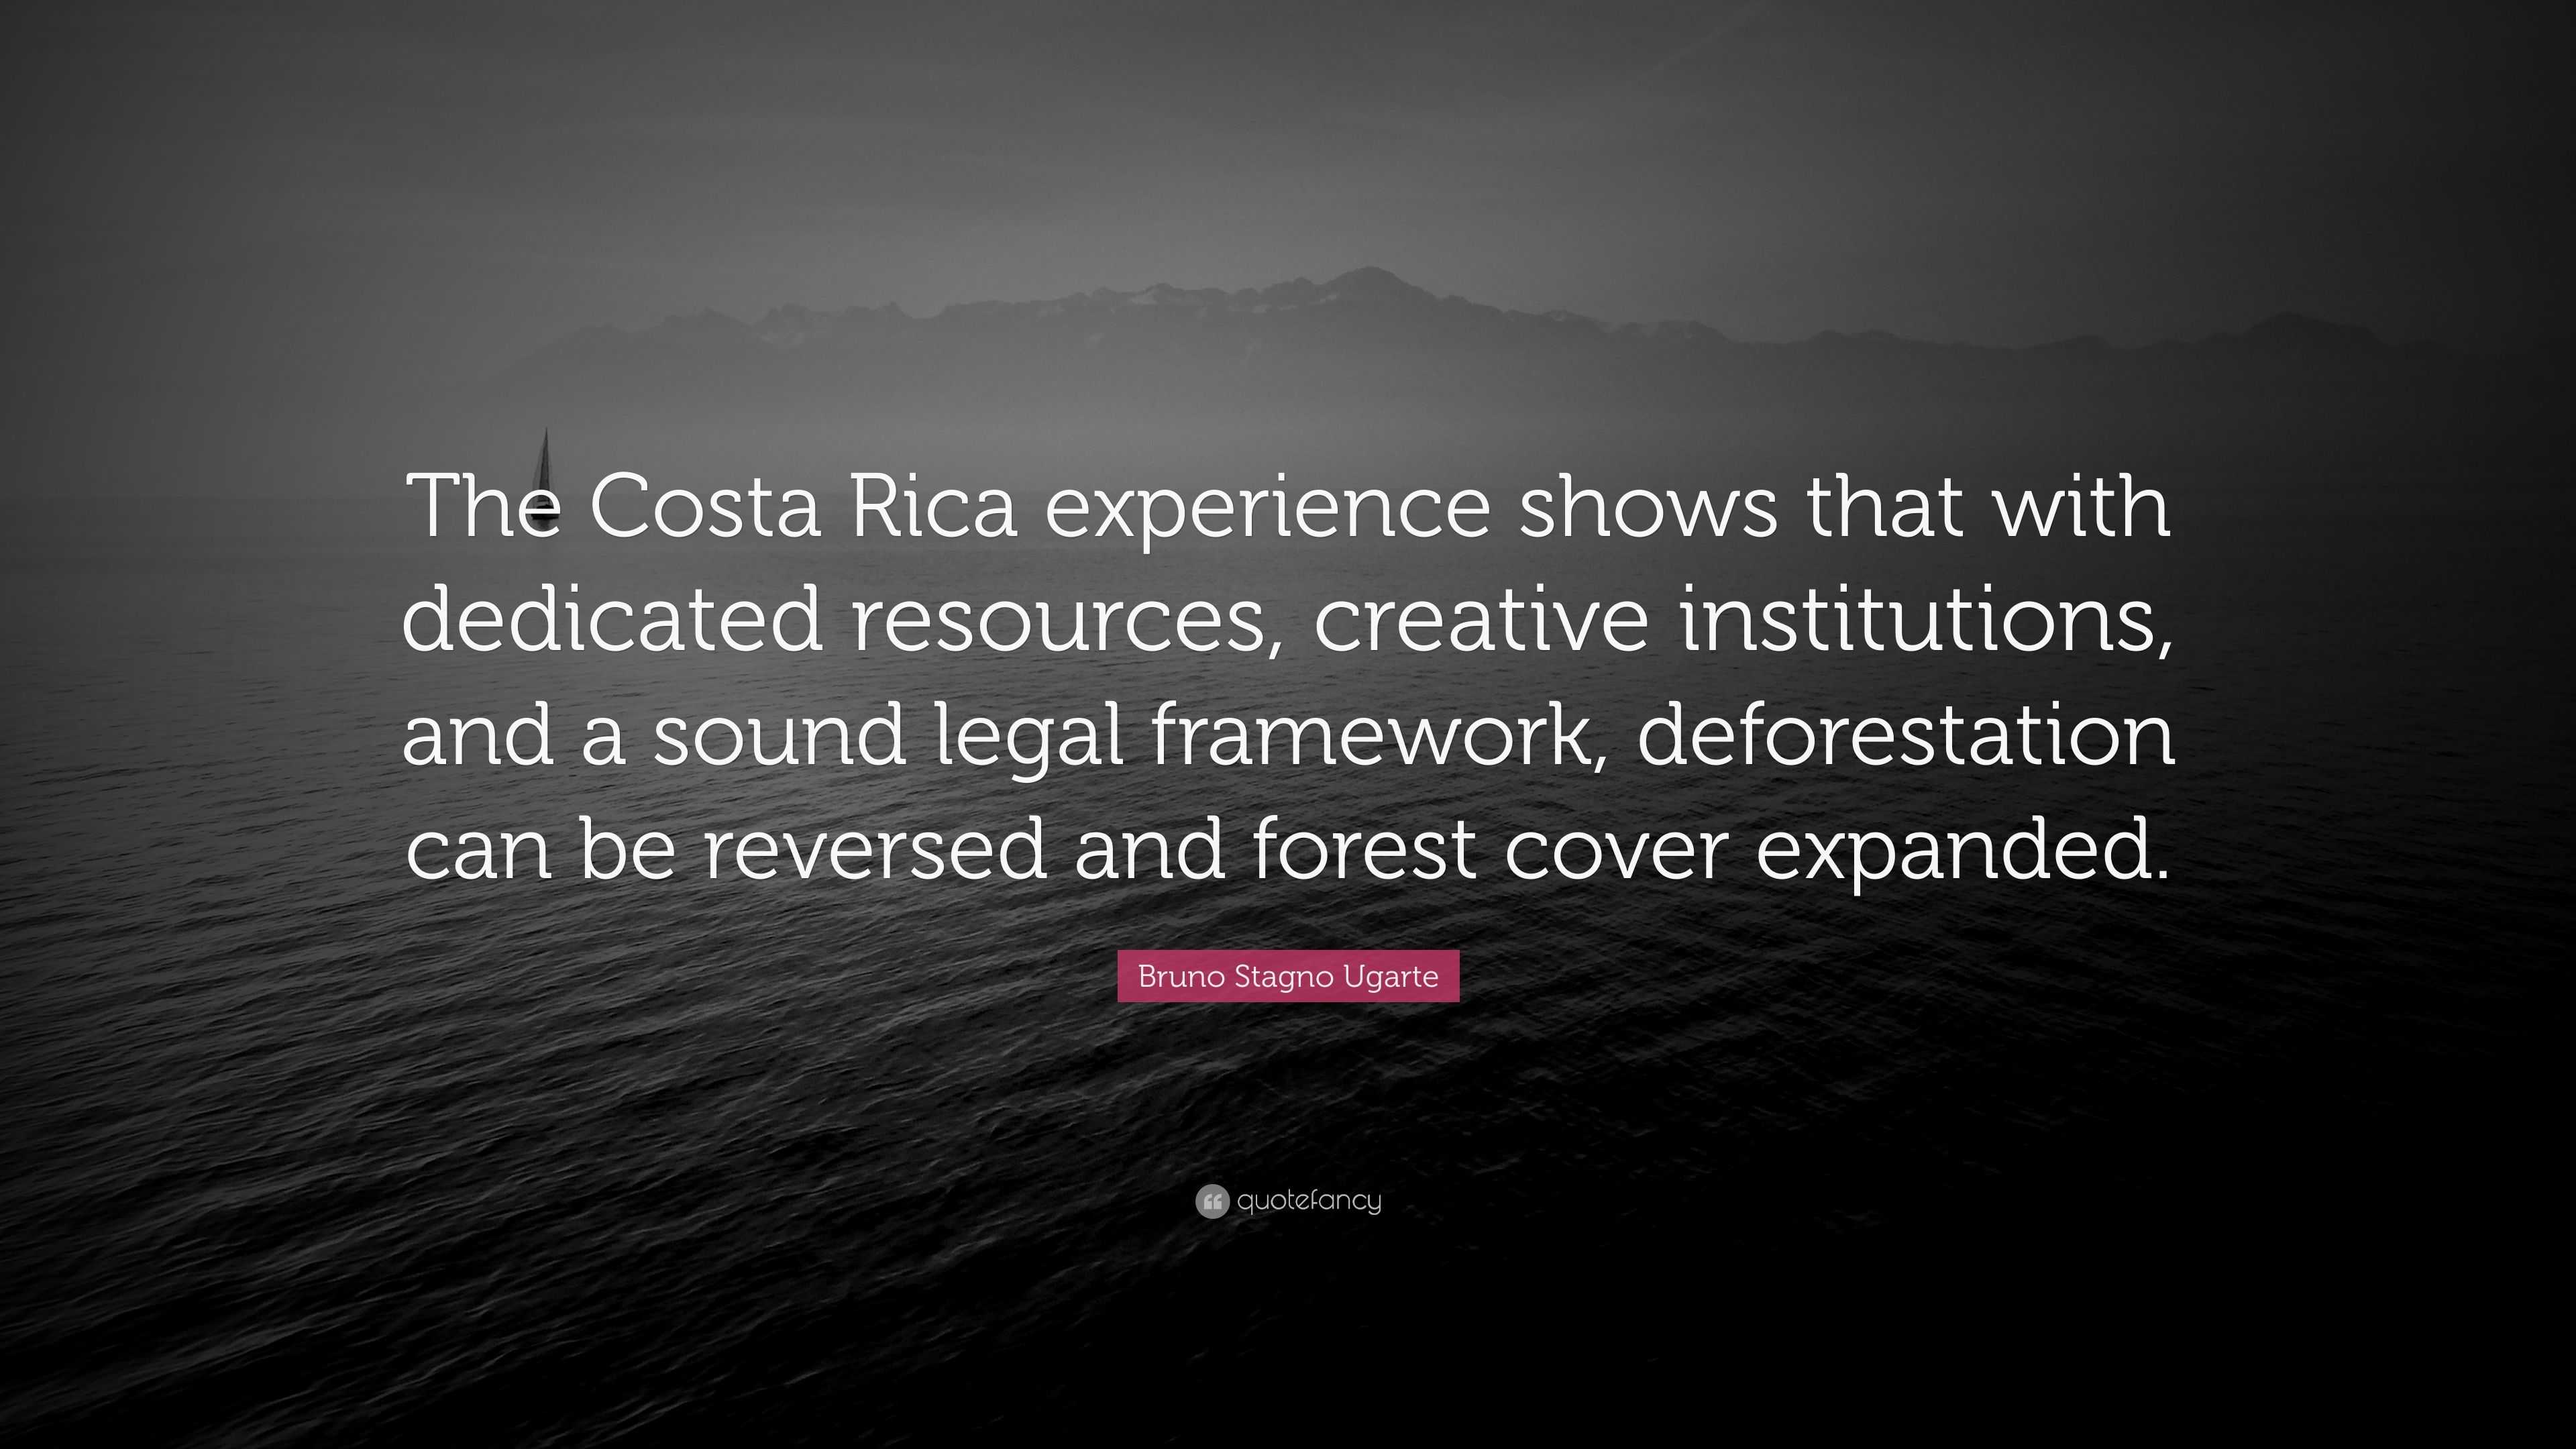 Bruno Stagno Ugarte Quote: “The Costa Rica experience shows that with ...